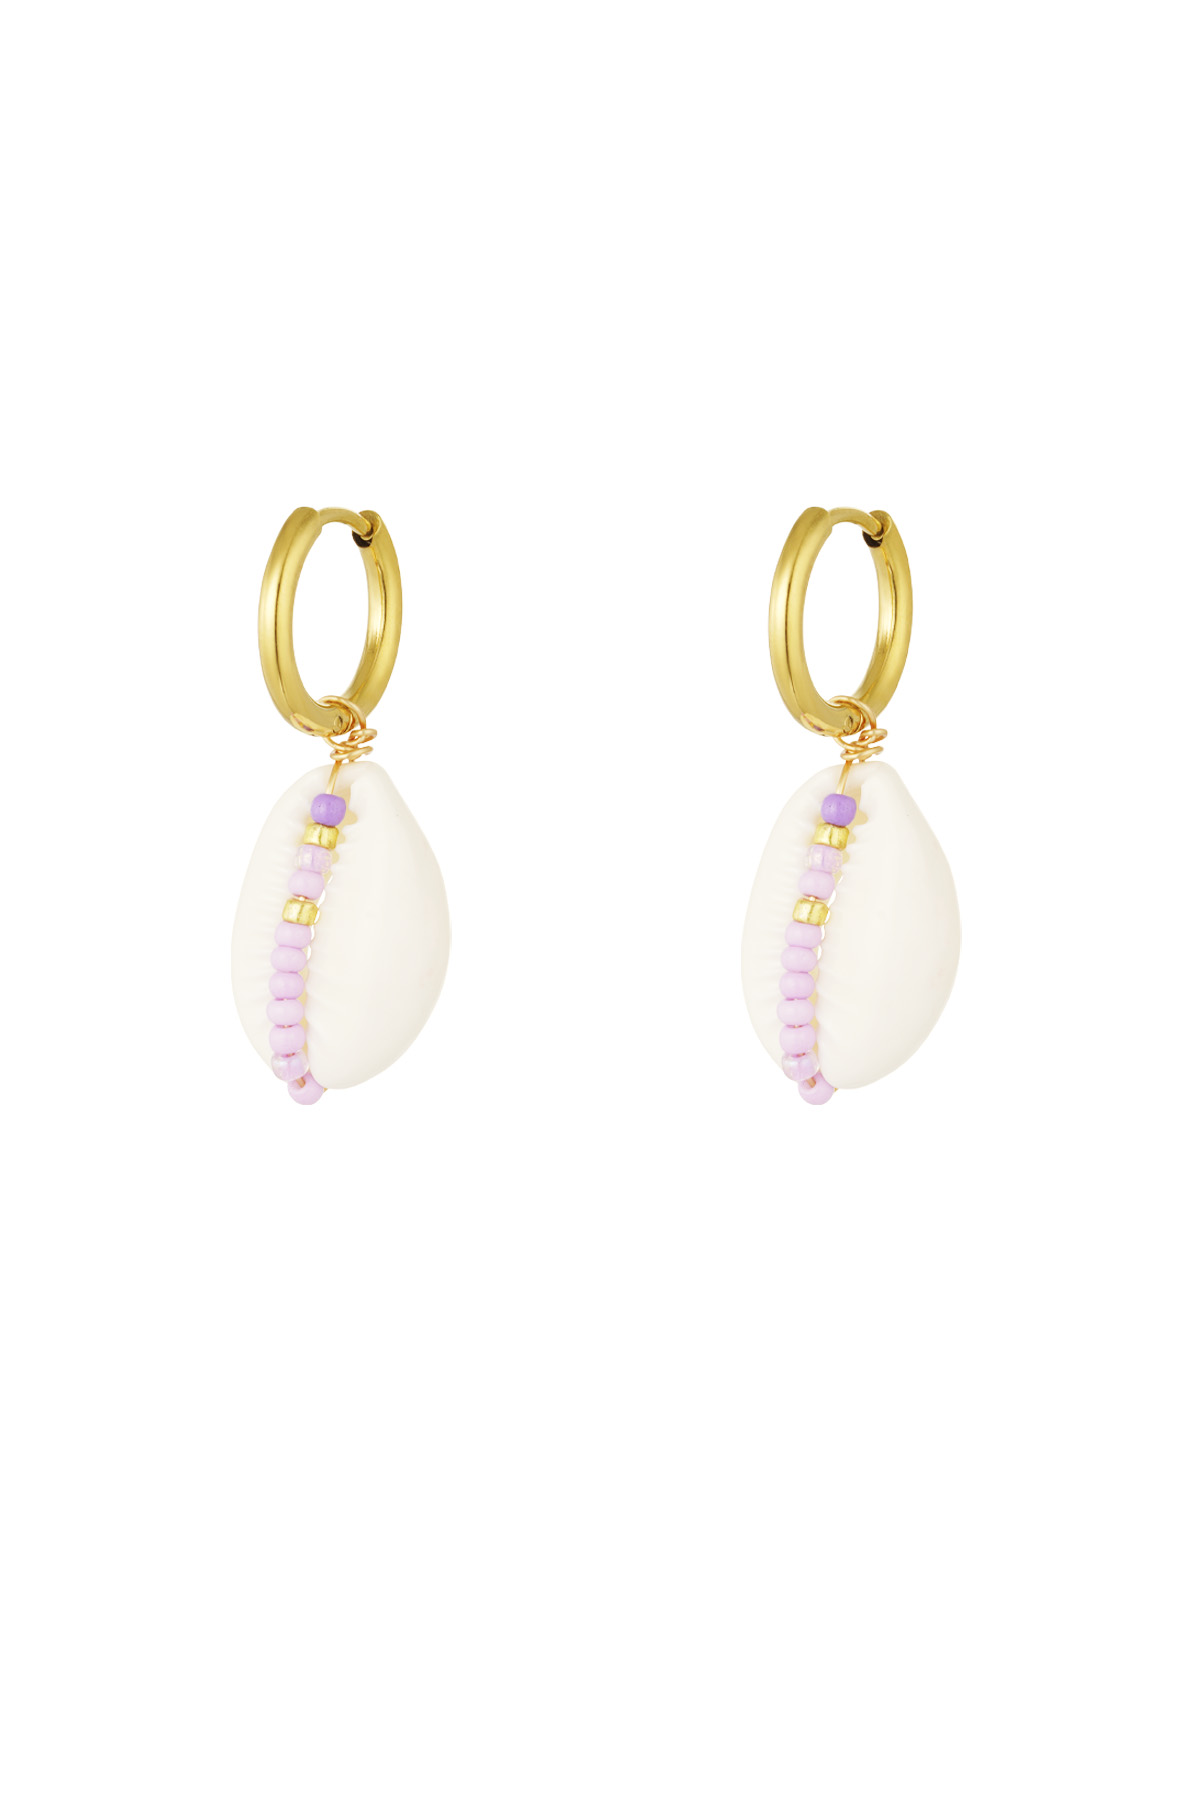 Stainless Steel Earrings with Seashell and Glass Beads - Lilac